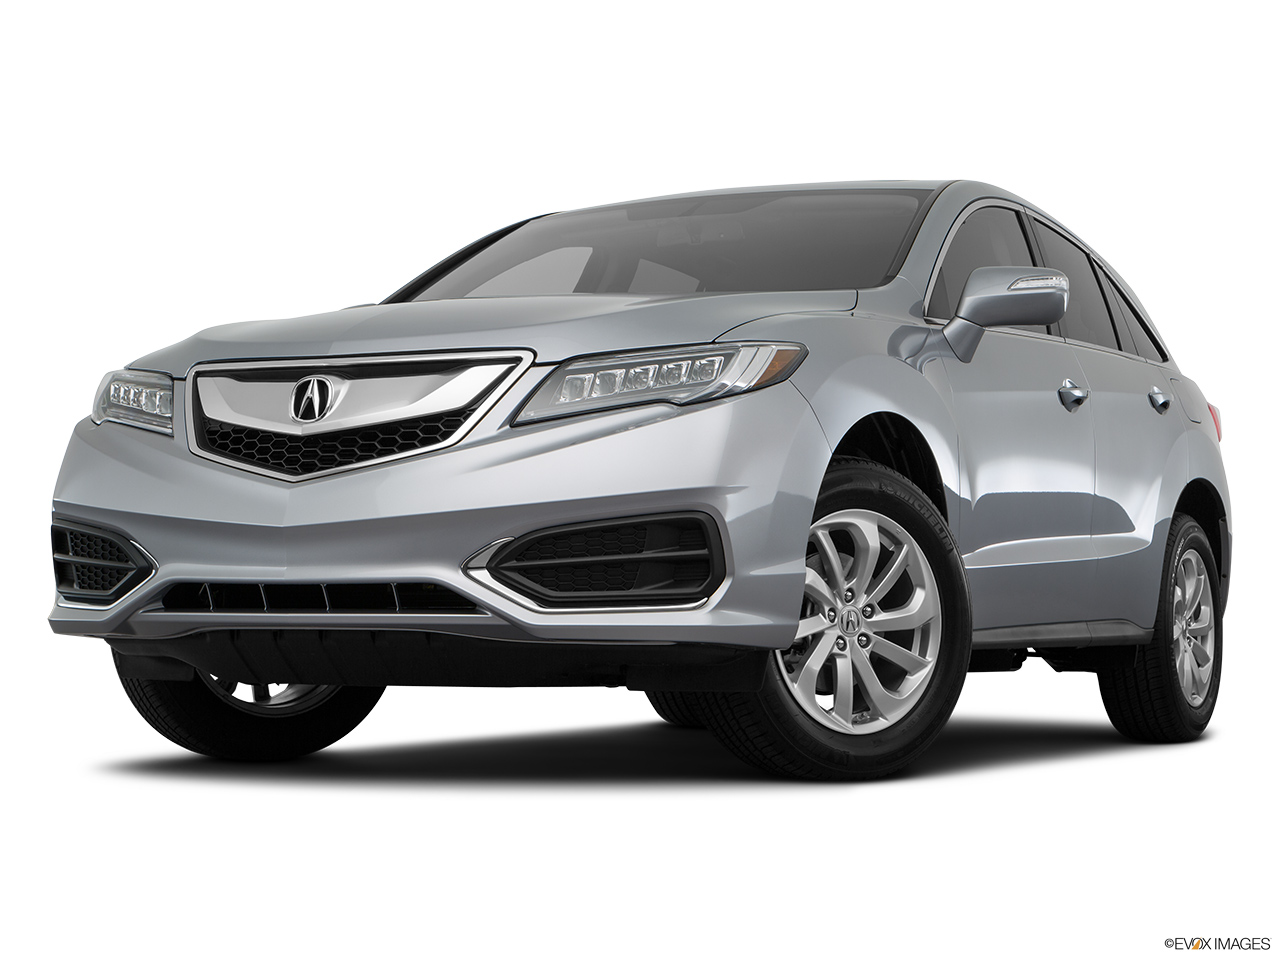 2017 Acura RDX AWD Front angle view, low wide perspective. 